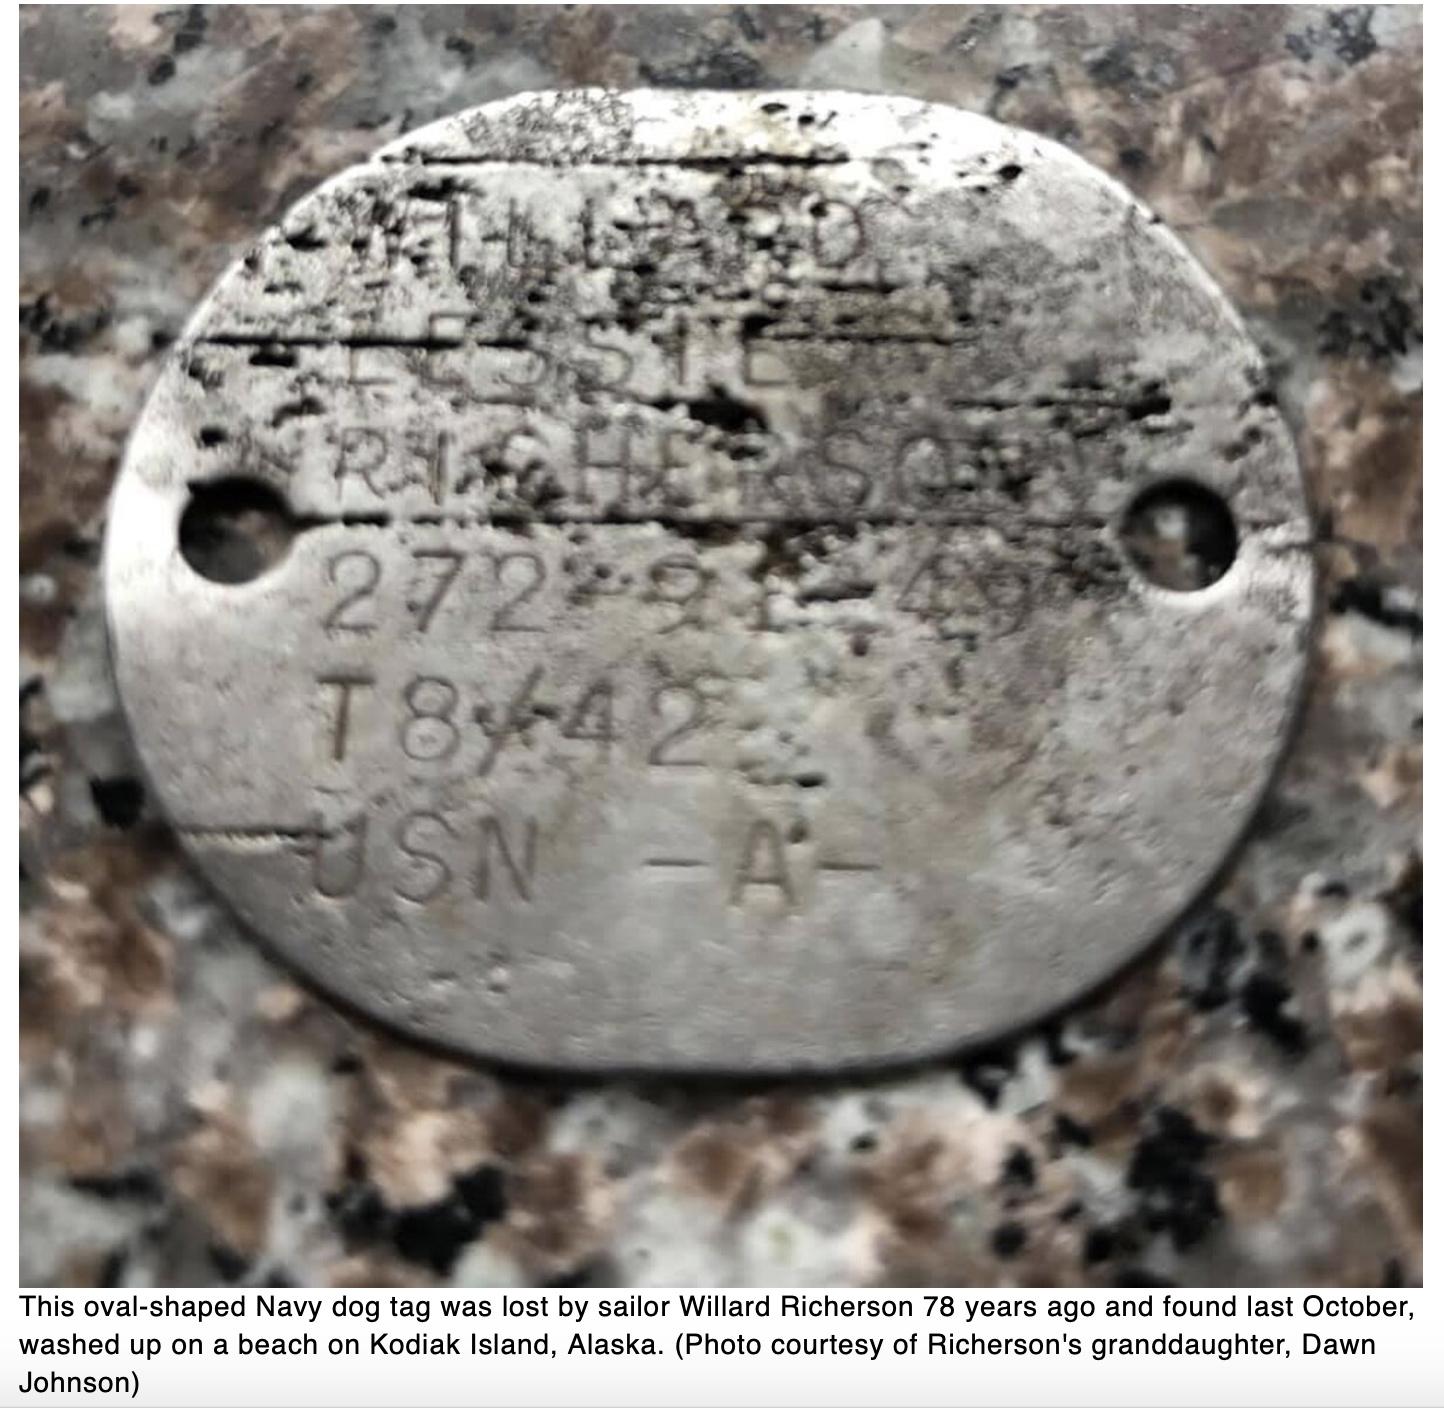  Woman hunting for sea glass in Alaska finds Navy dog tag lost during WWII